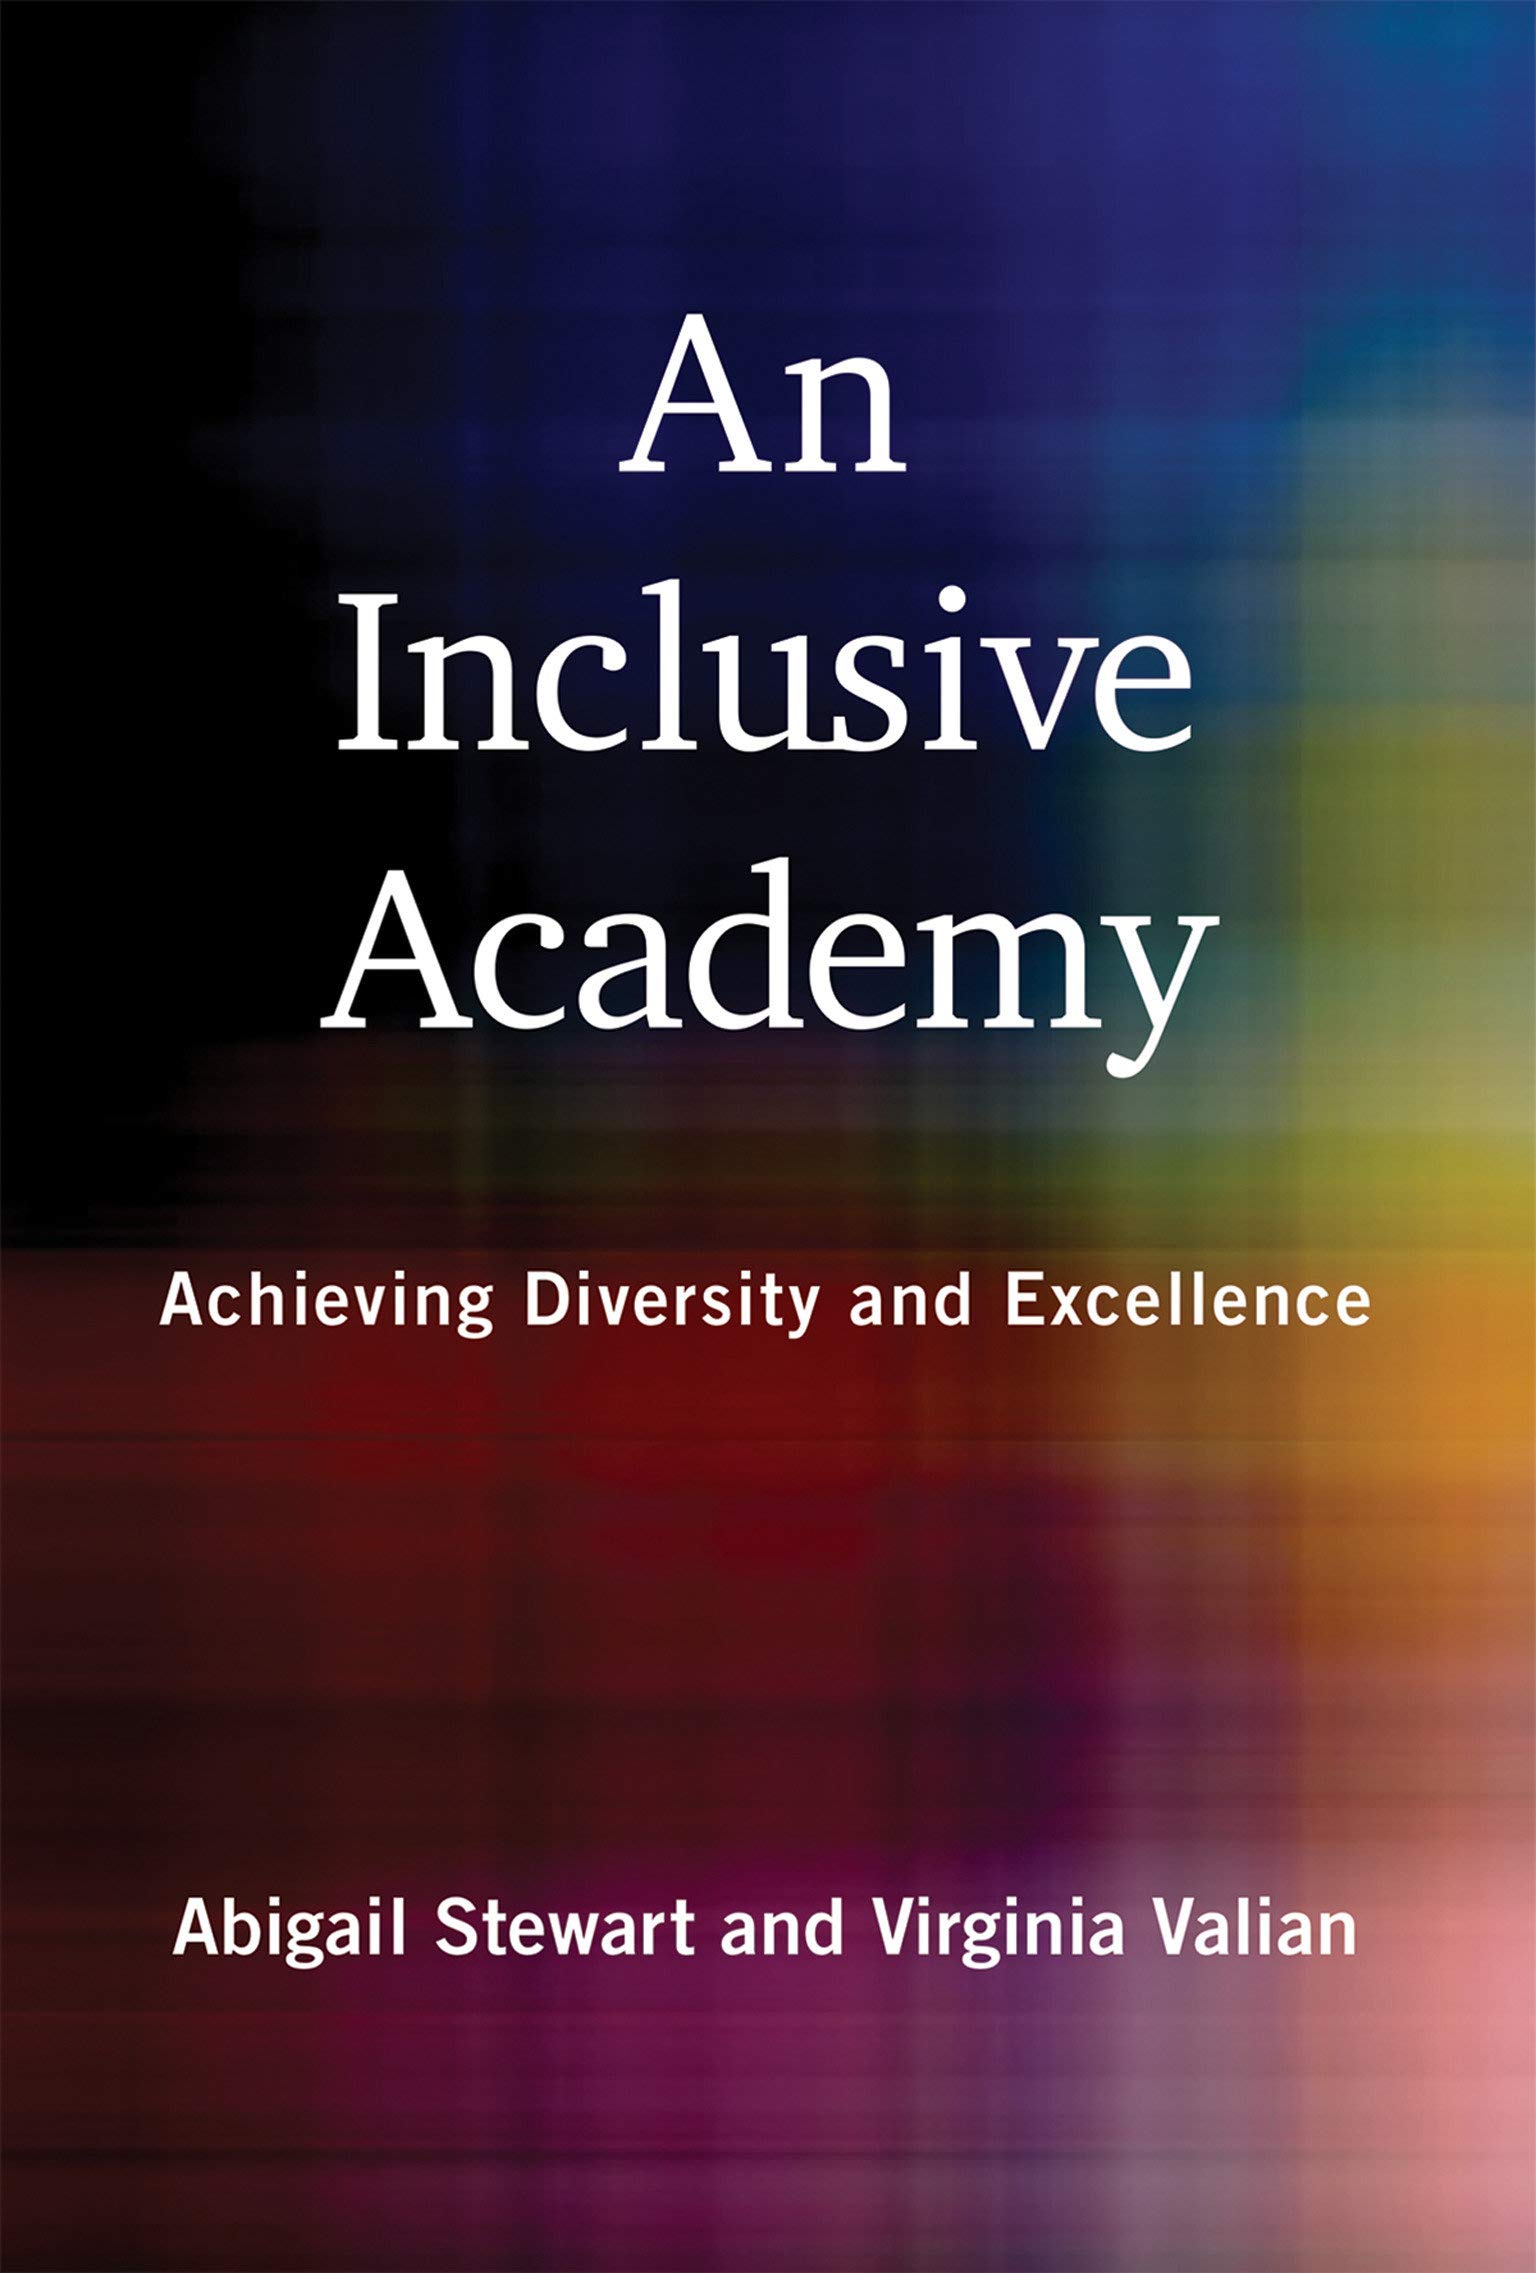 An Inclusive Academy : Achieving Diversity and Excellence By Abigail Stewart and Virginia Valian